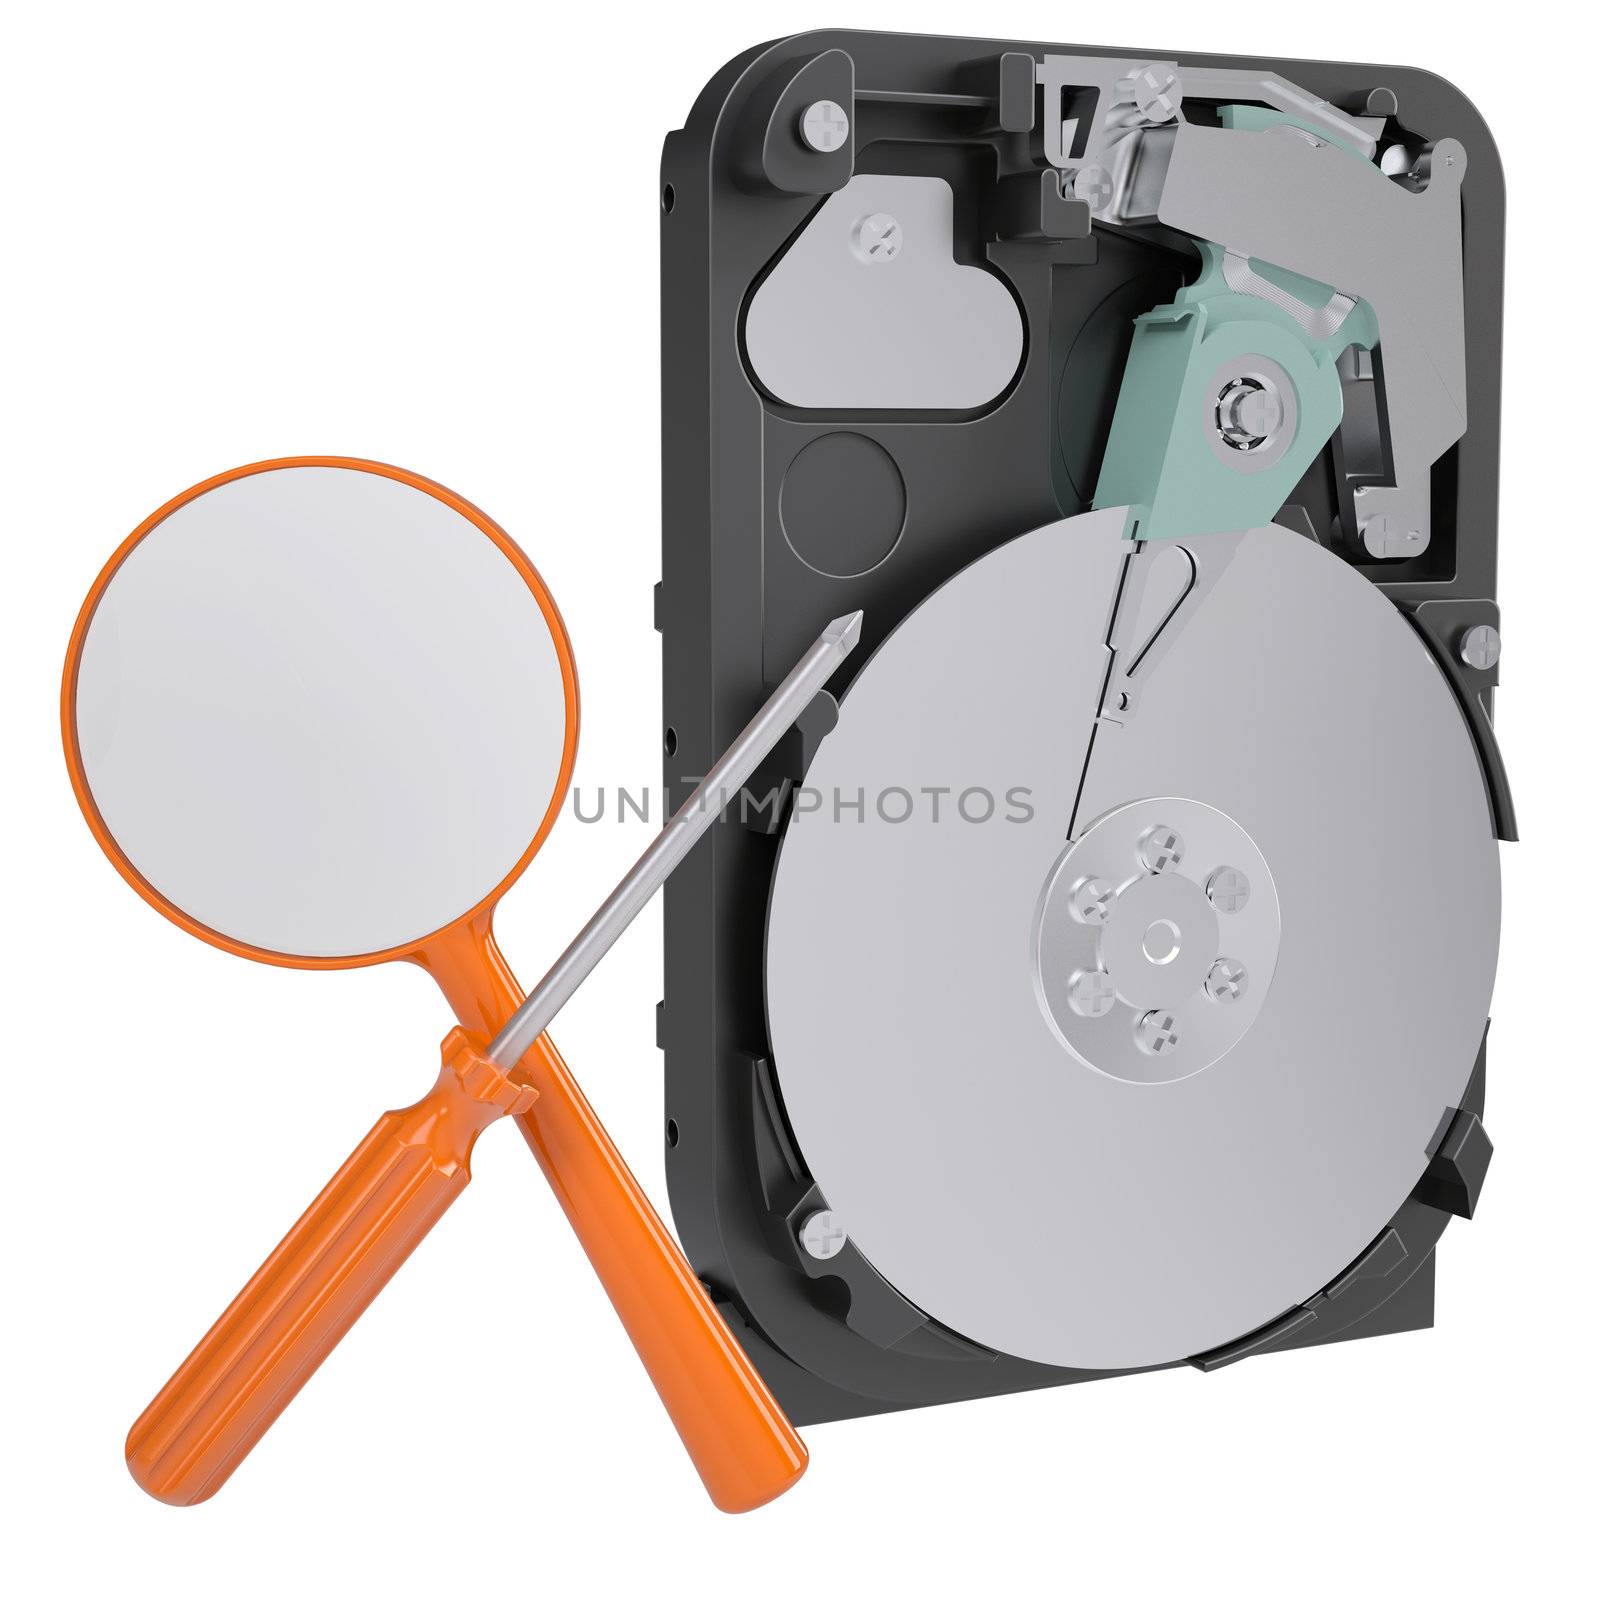 Hard drive, screwdriver and magnifying glass by cherezoff